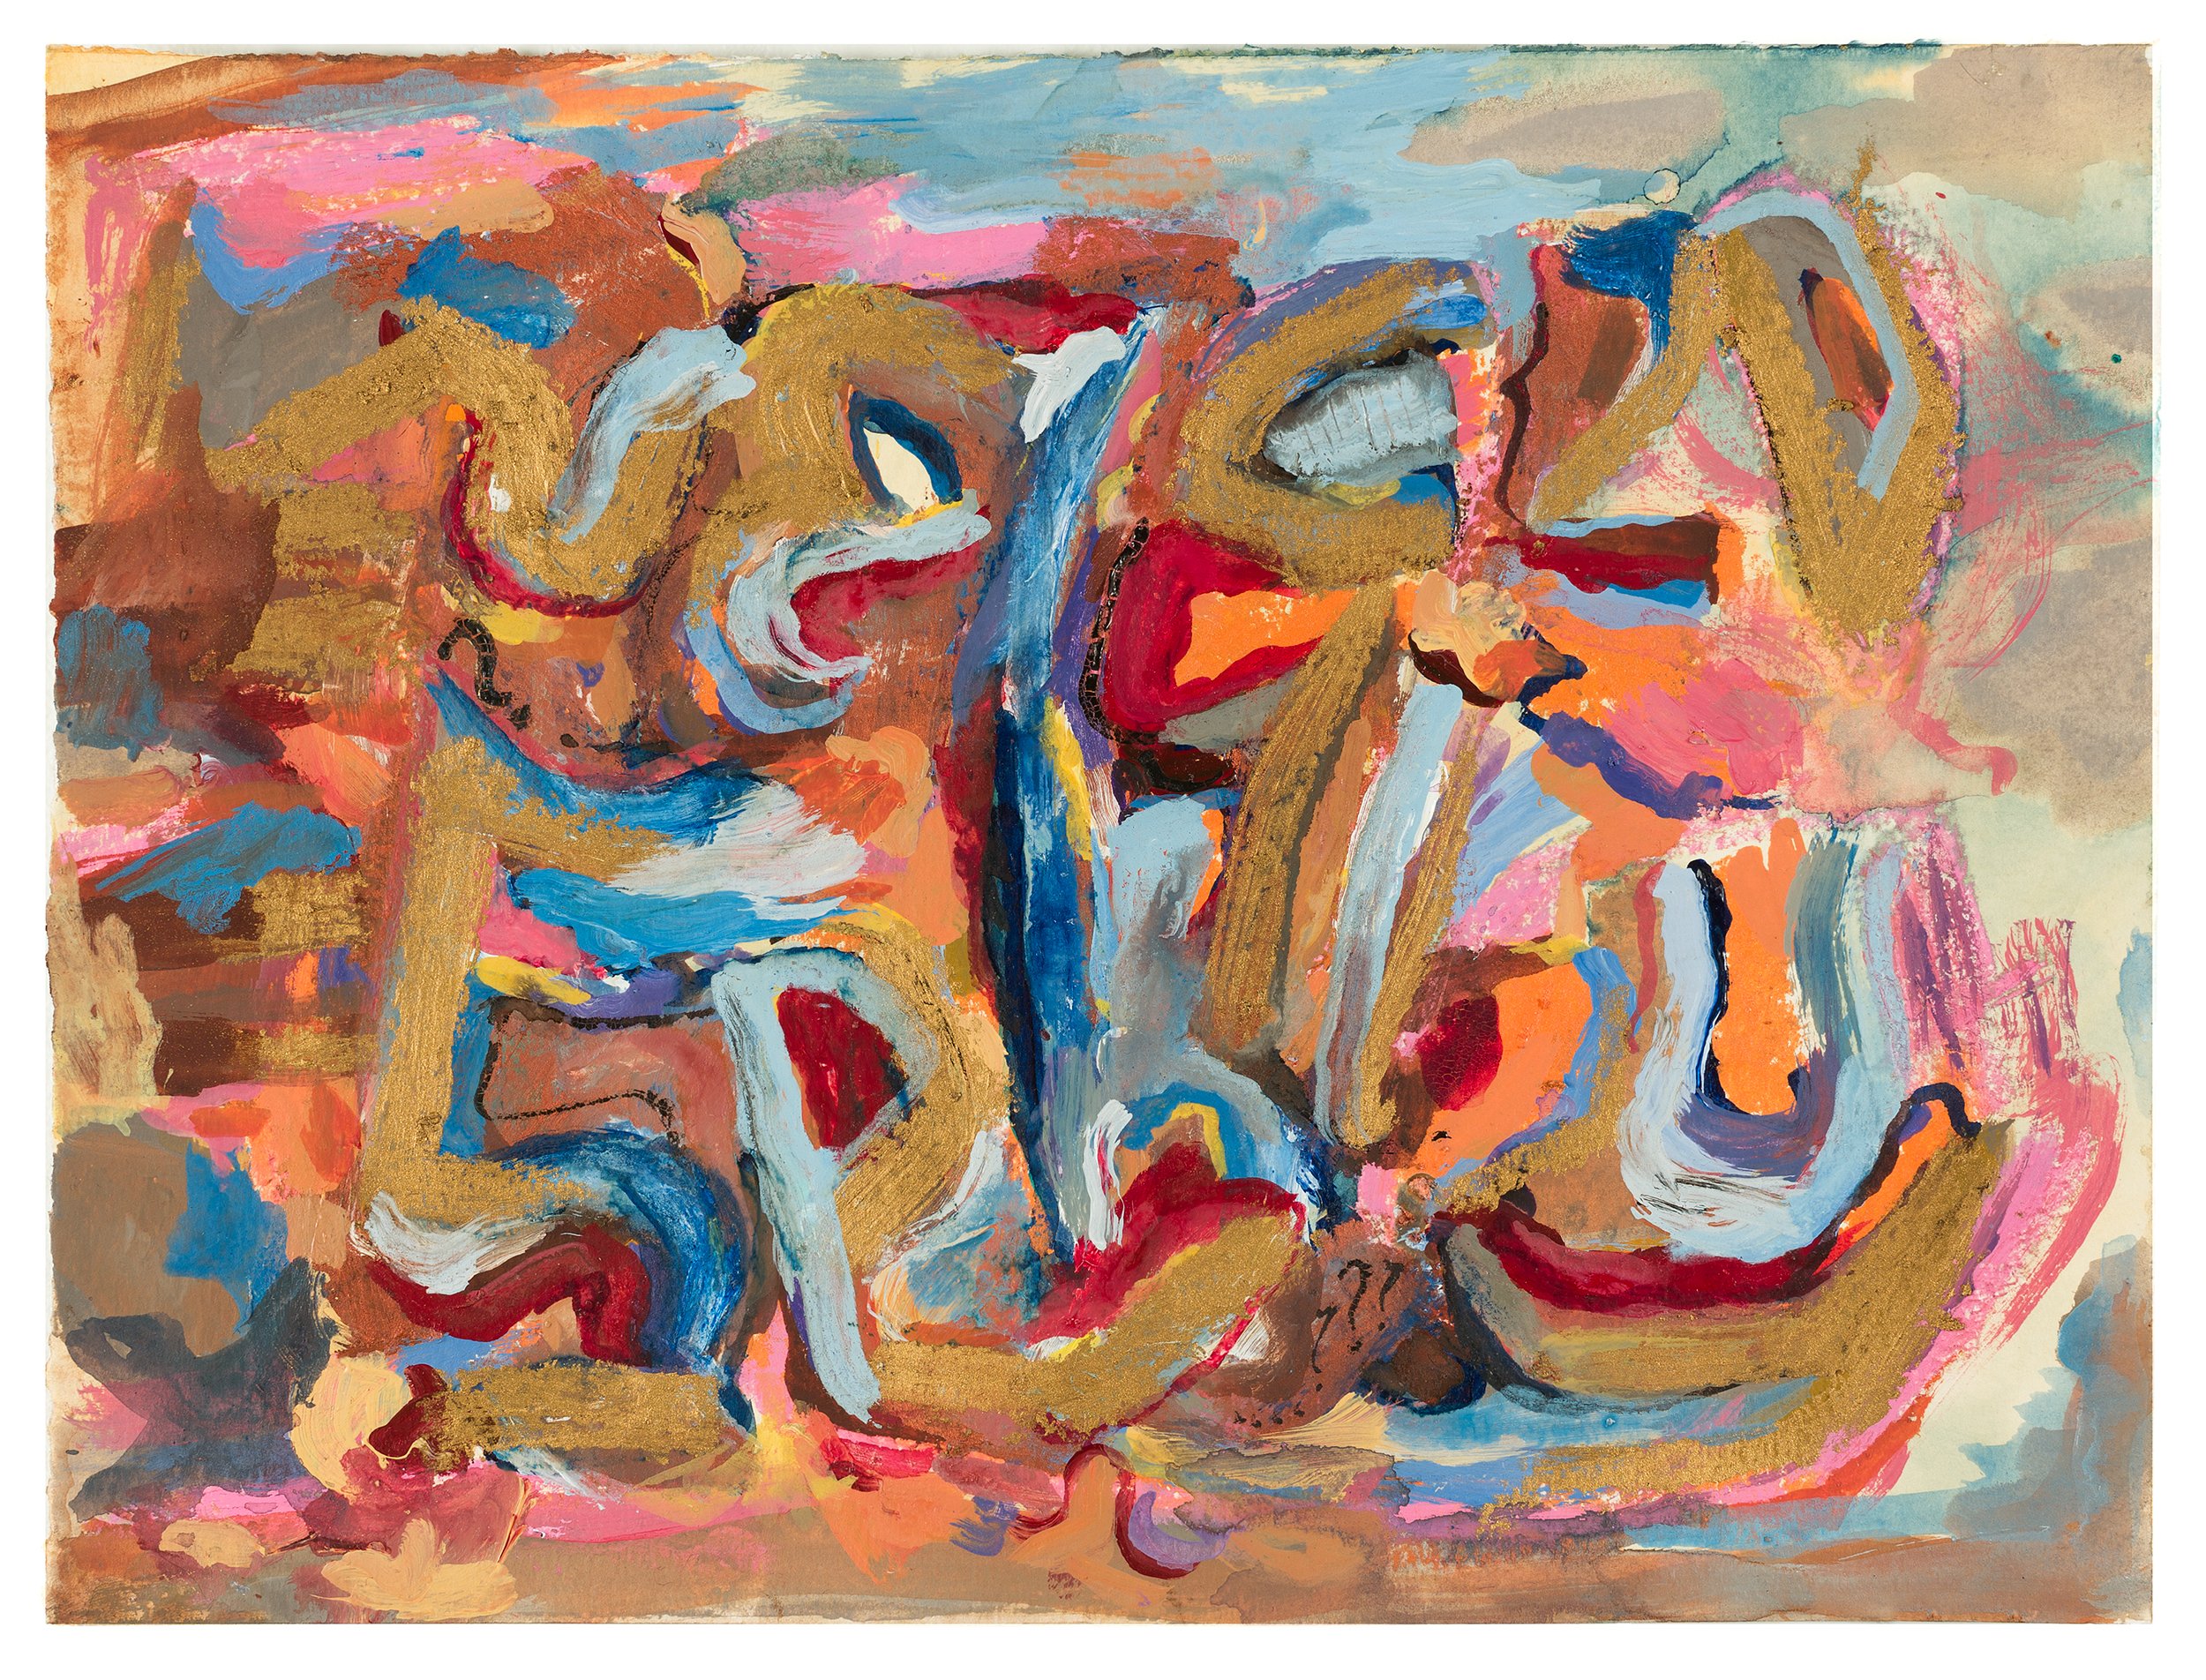 A picture containing birthday, gouache, watercolor, acrylic, oil stick on paper, alt-text generated title, 10 x 13 inches